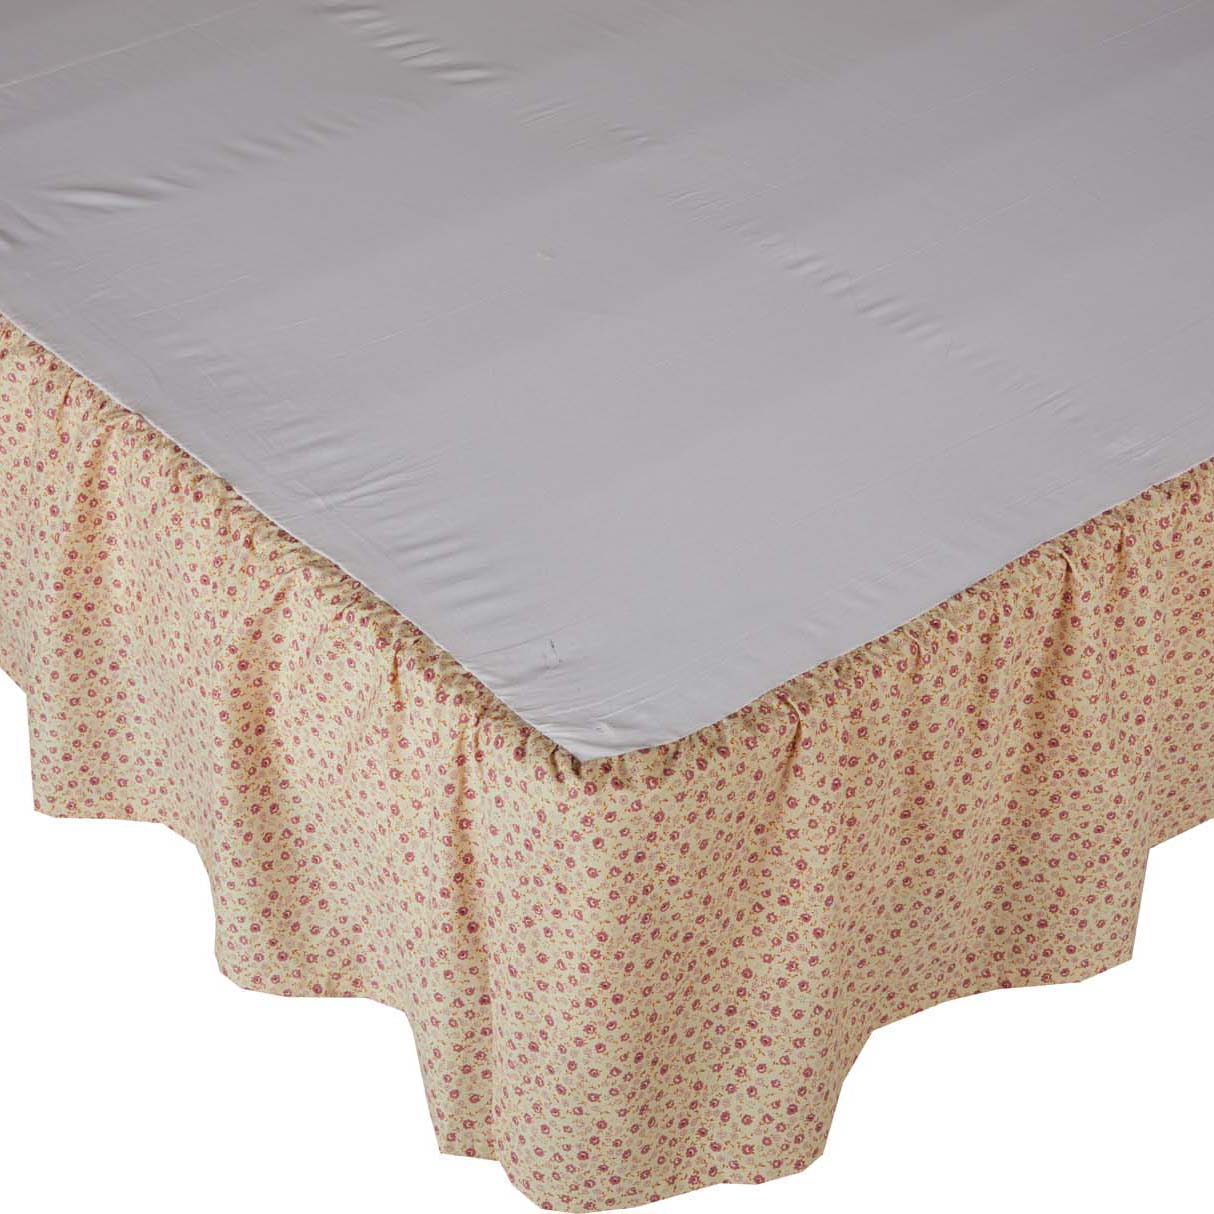 70076-Camilia-King-Bed-Skirt-78x80x16-image-5